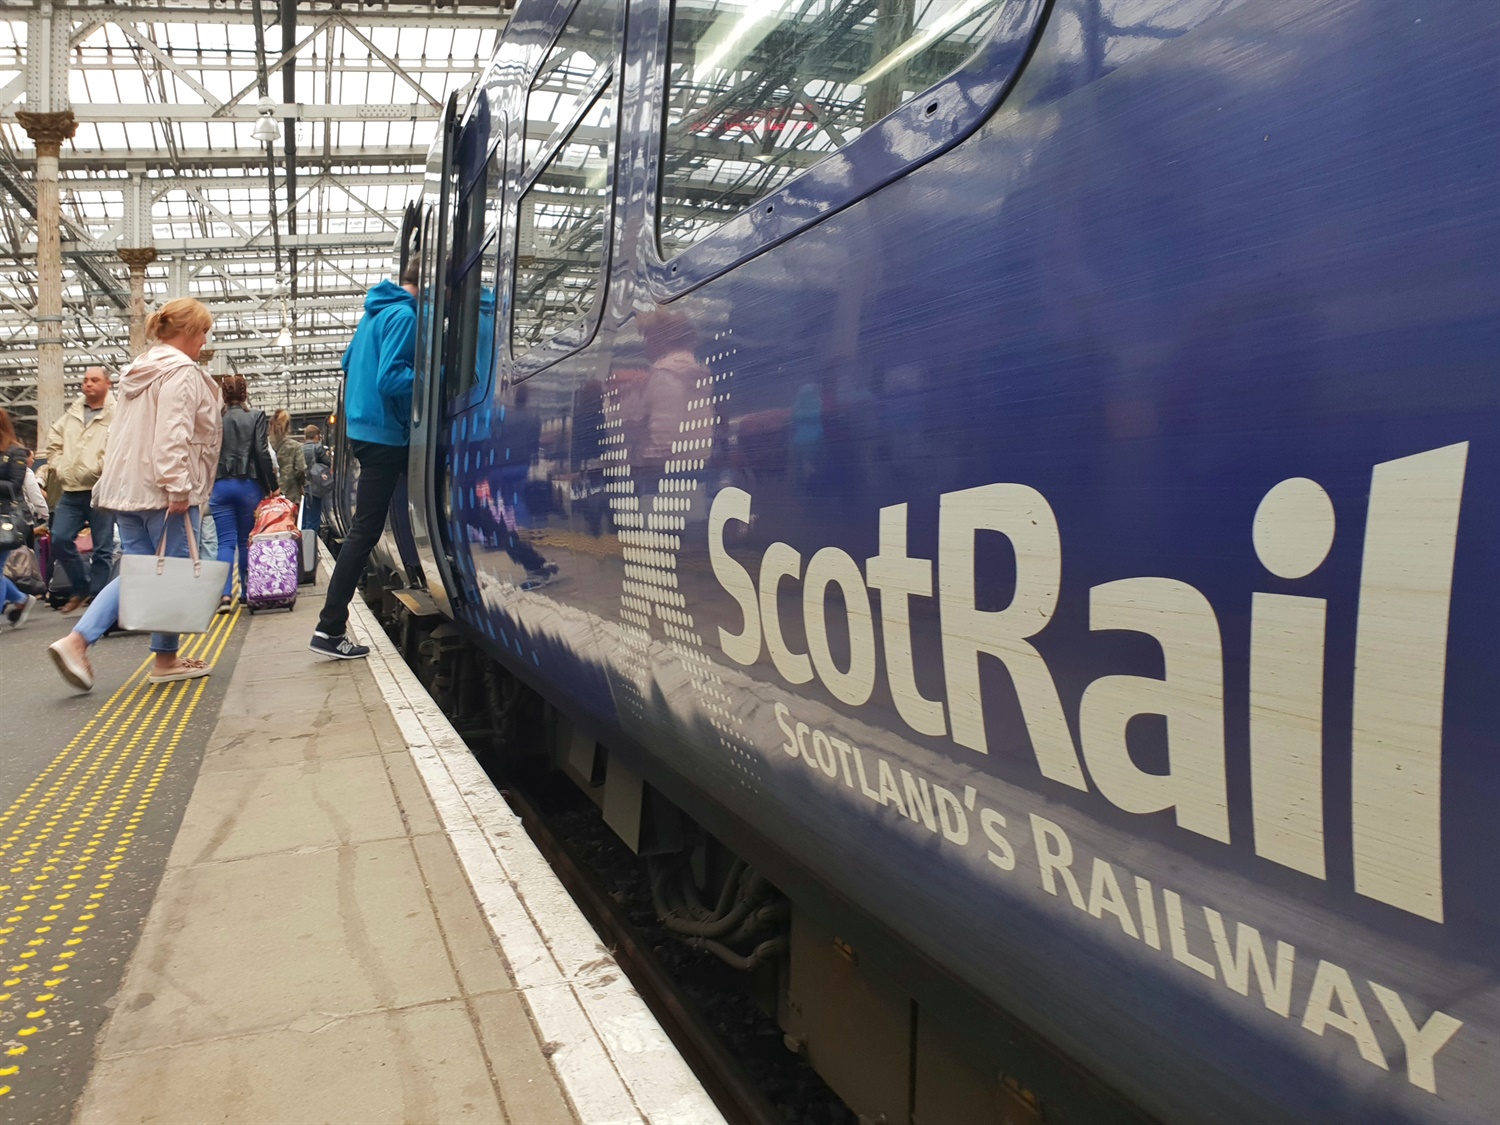 Labour call for renationalisation ahead of Scottish Parliament vote on ScotRail contract